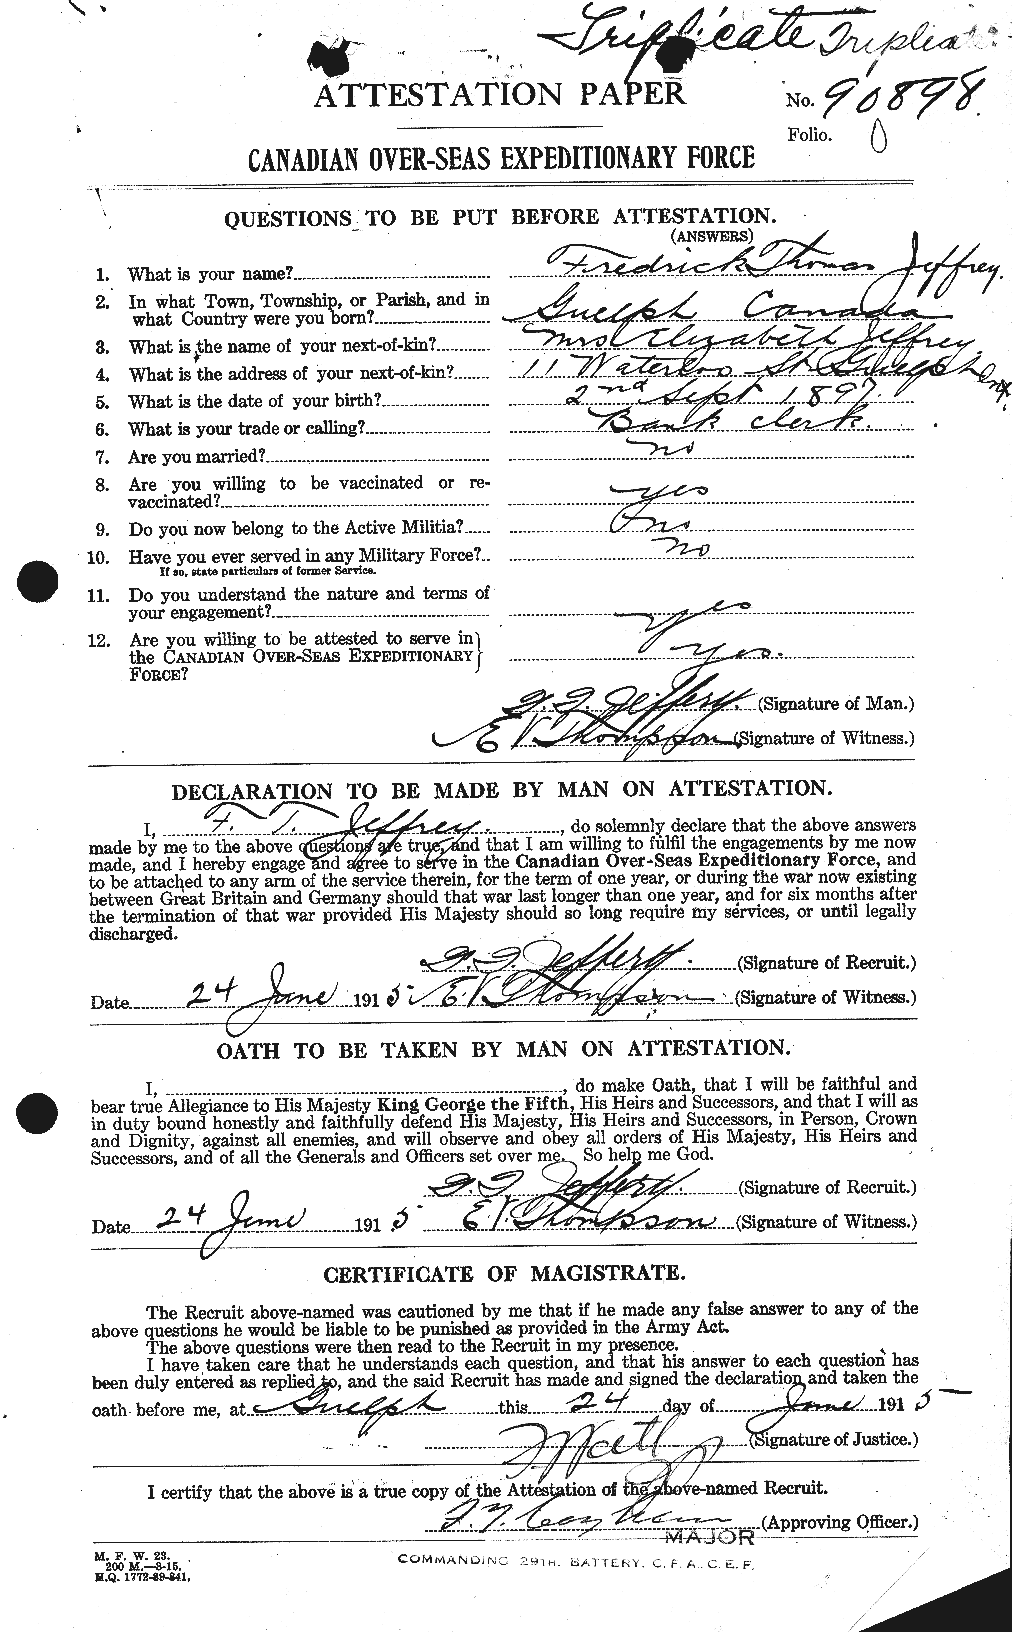 Personnel Records of the First World War - CEF 417886a